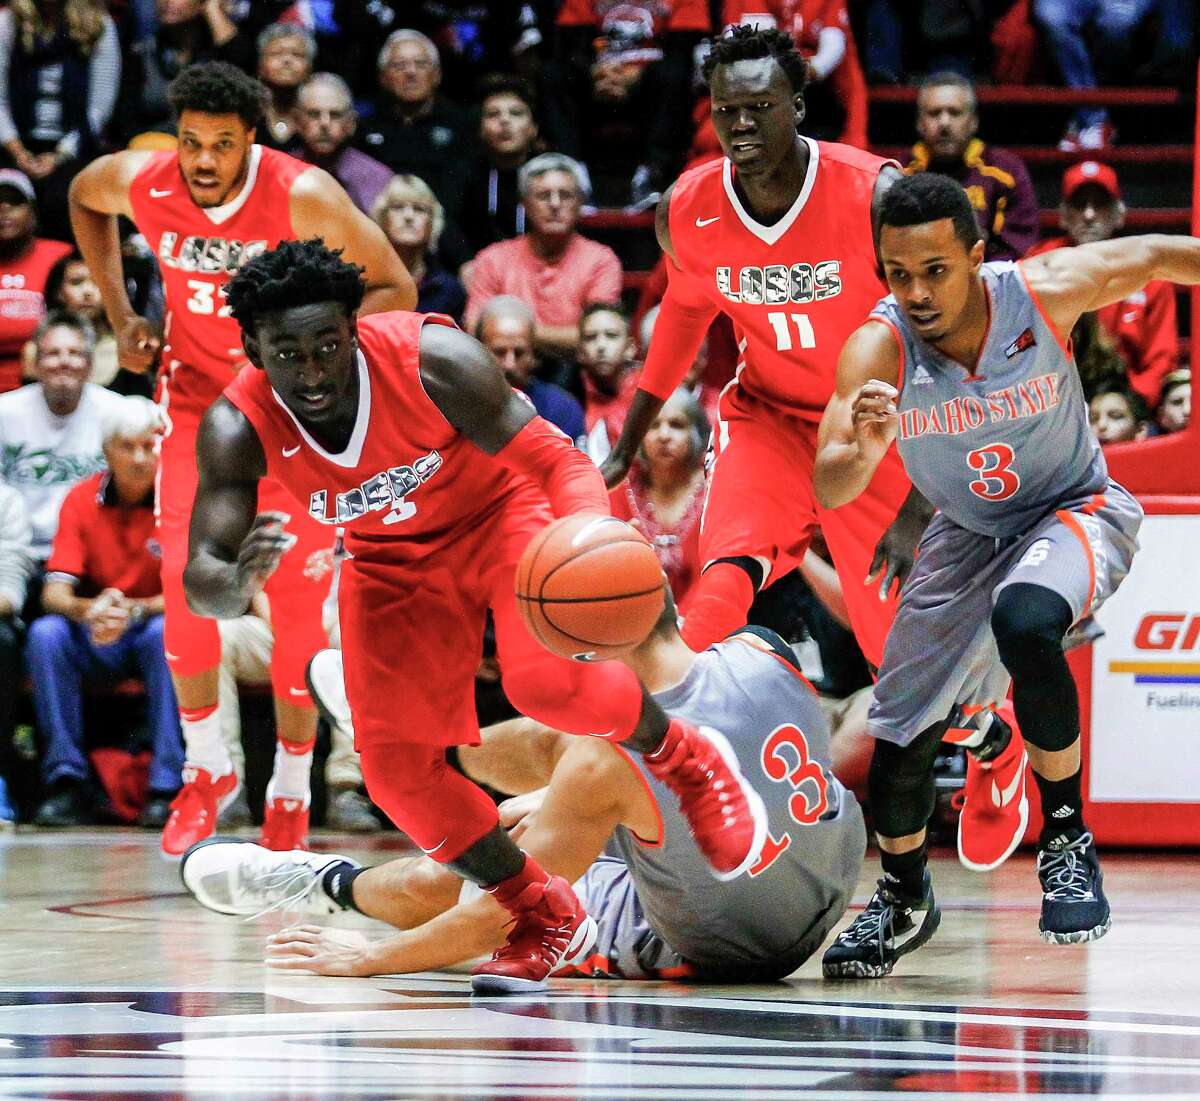 New Mexico's Jordan Hunter (3) grabs up a loose ball from the Idaho defense during the first half of an NCAA college basketball game in Albuquerque, N.M., Friday, Nov. 11, 2016. (AP Photo/Juan Antonio Labreche)